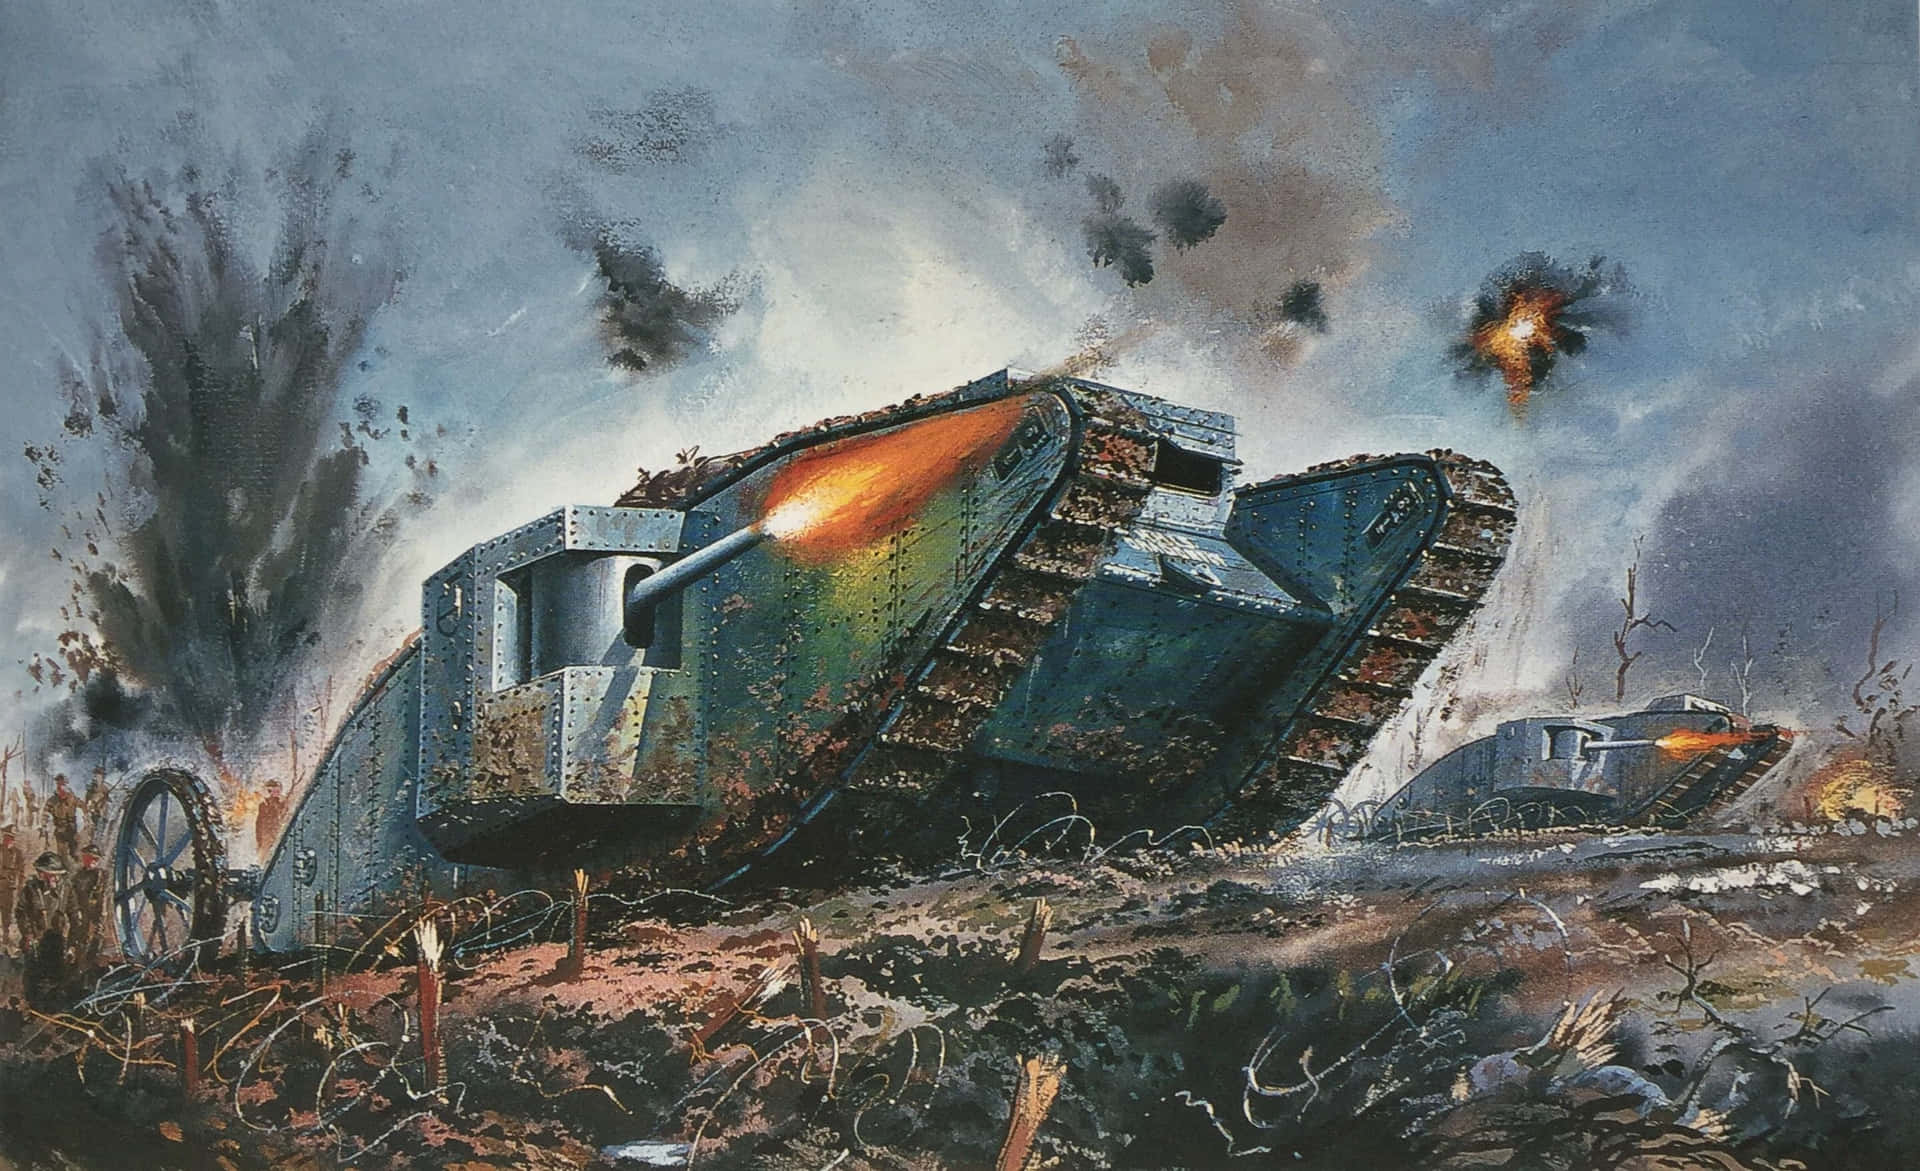 A Painting Of Two Tanks In The Field